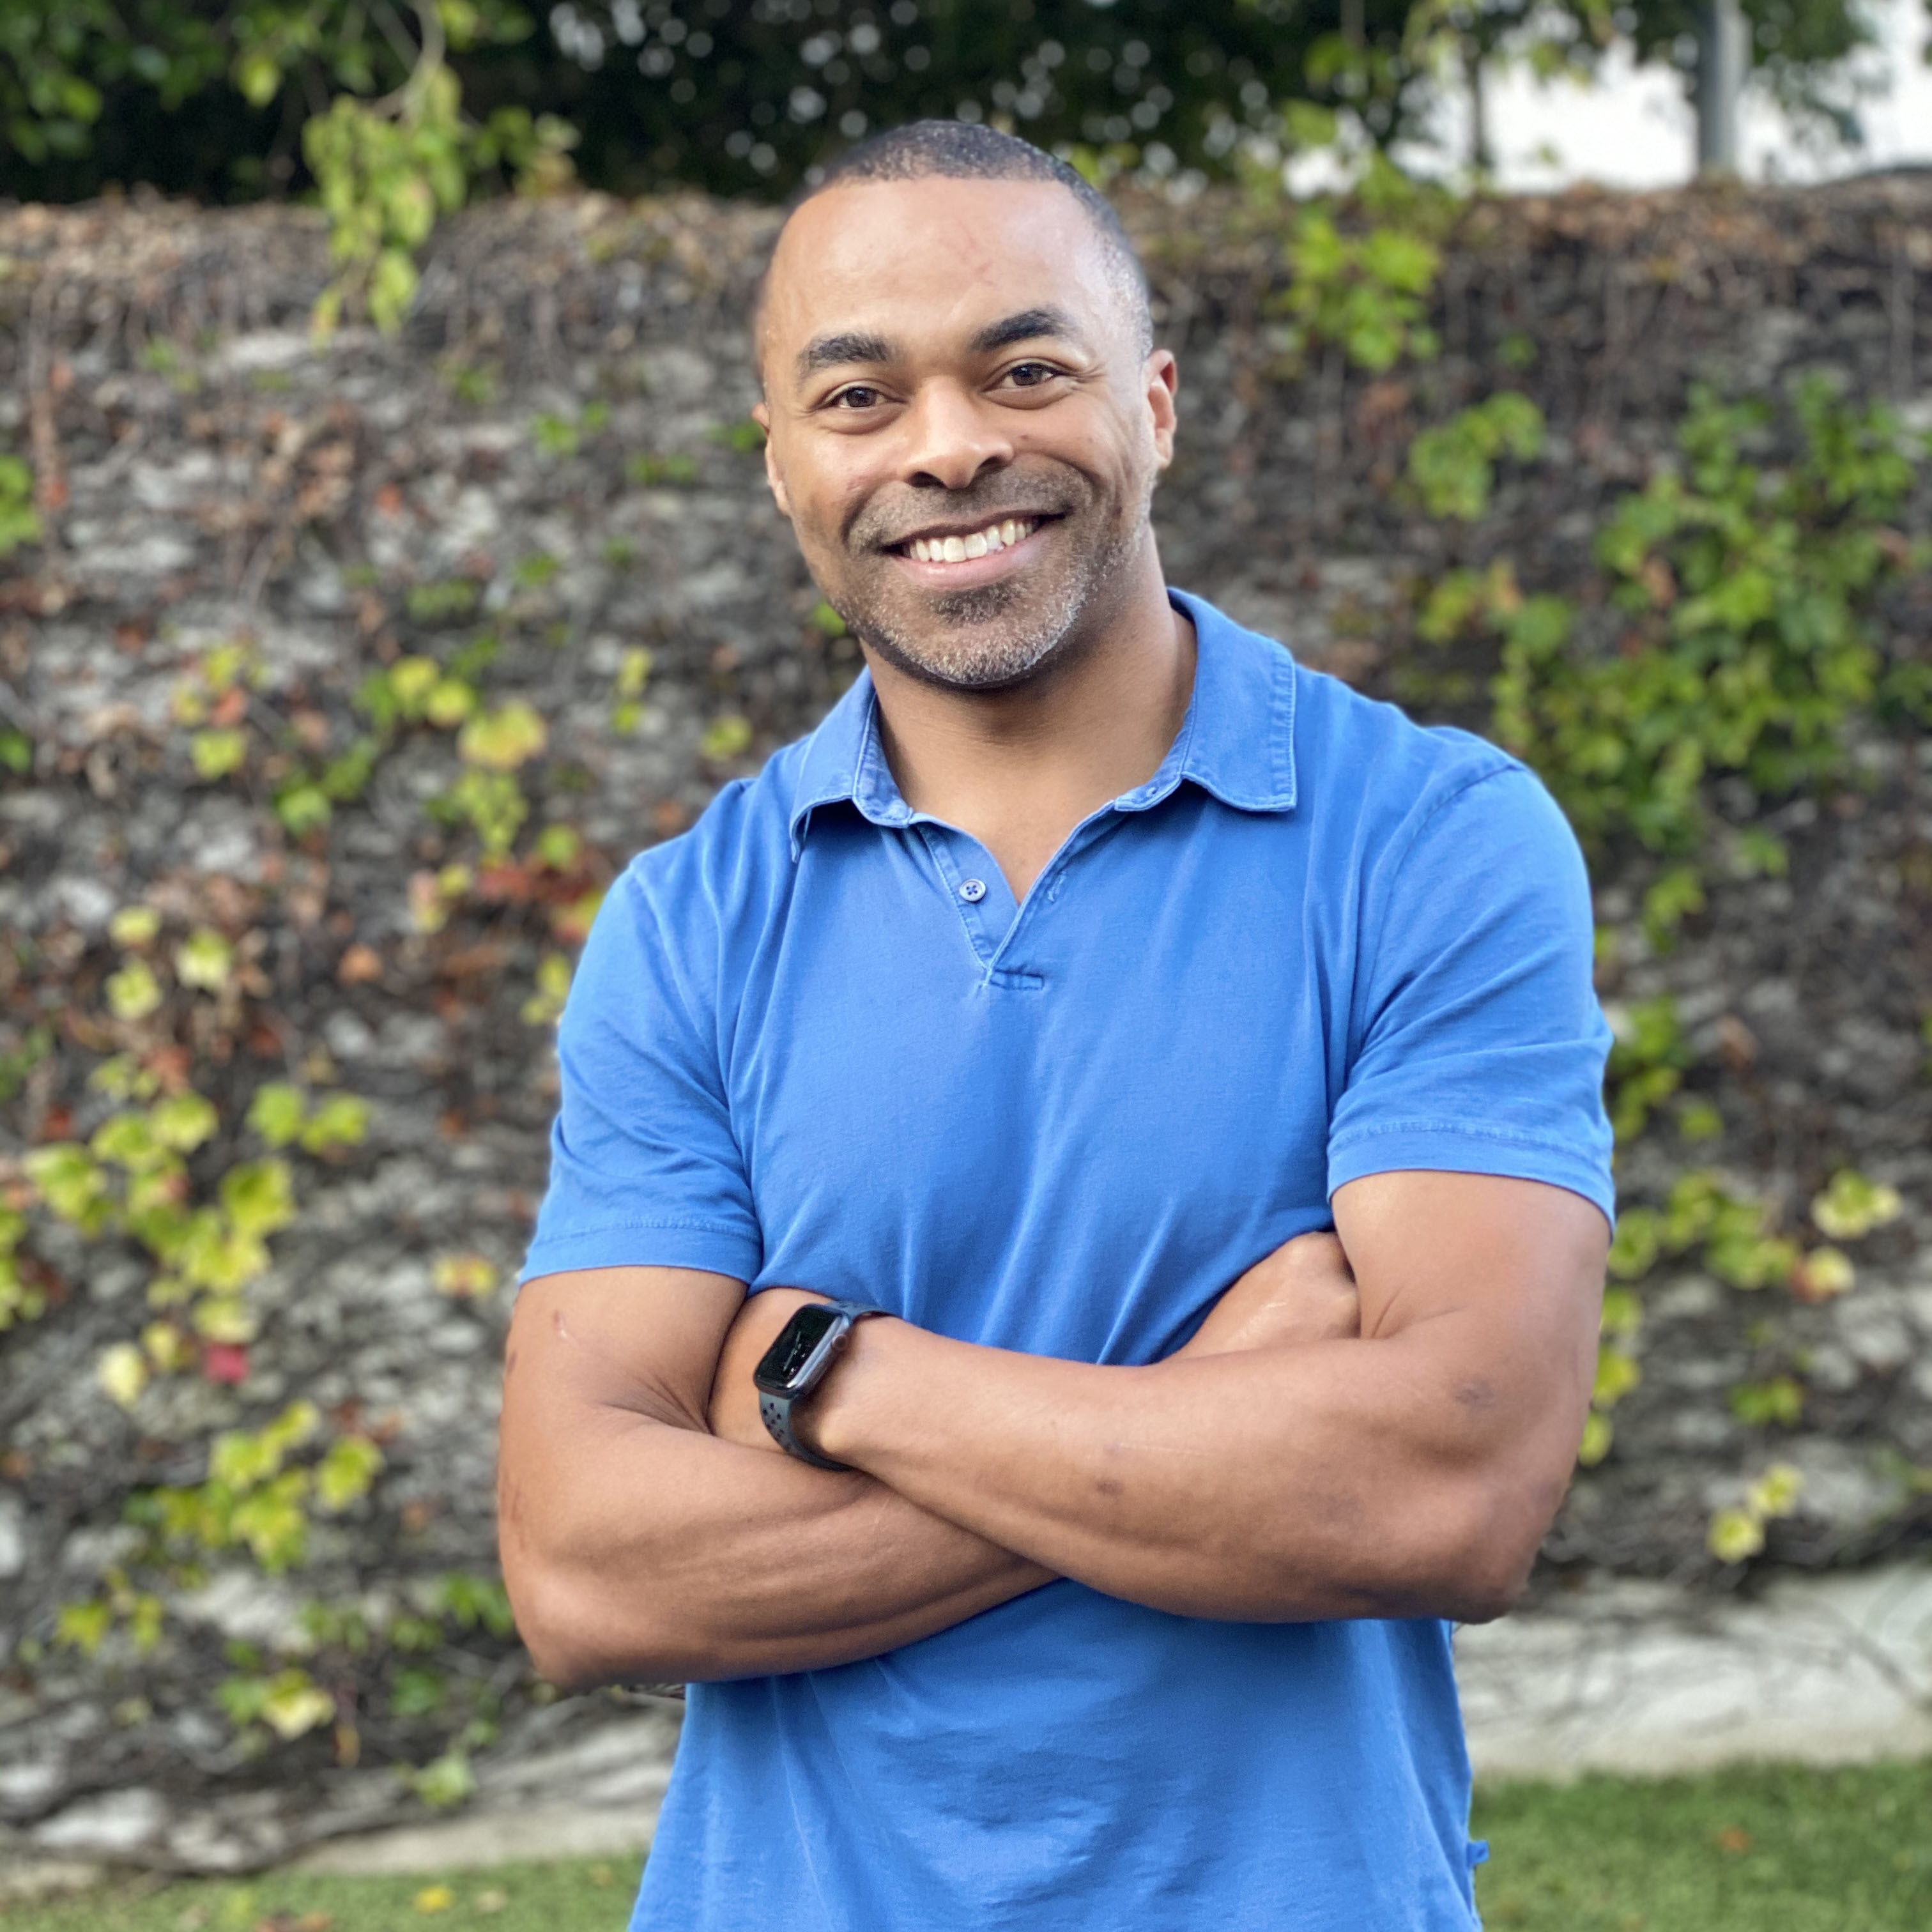 Founder Marc Washington Launched Muniq to Improve Health in Underserved Communities